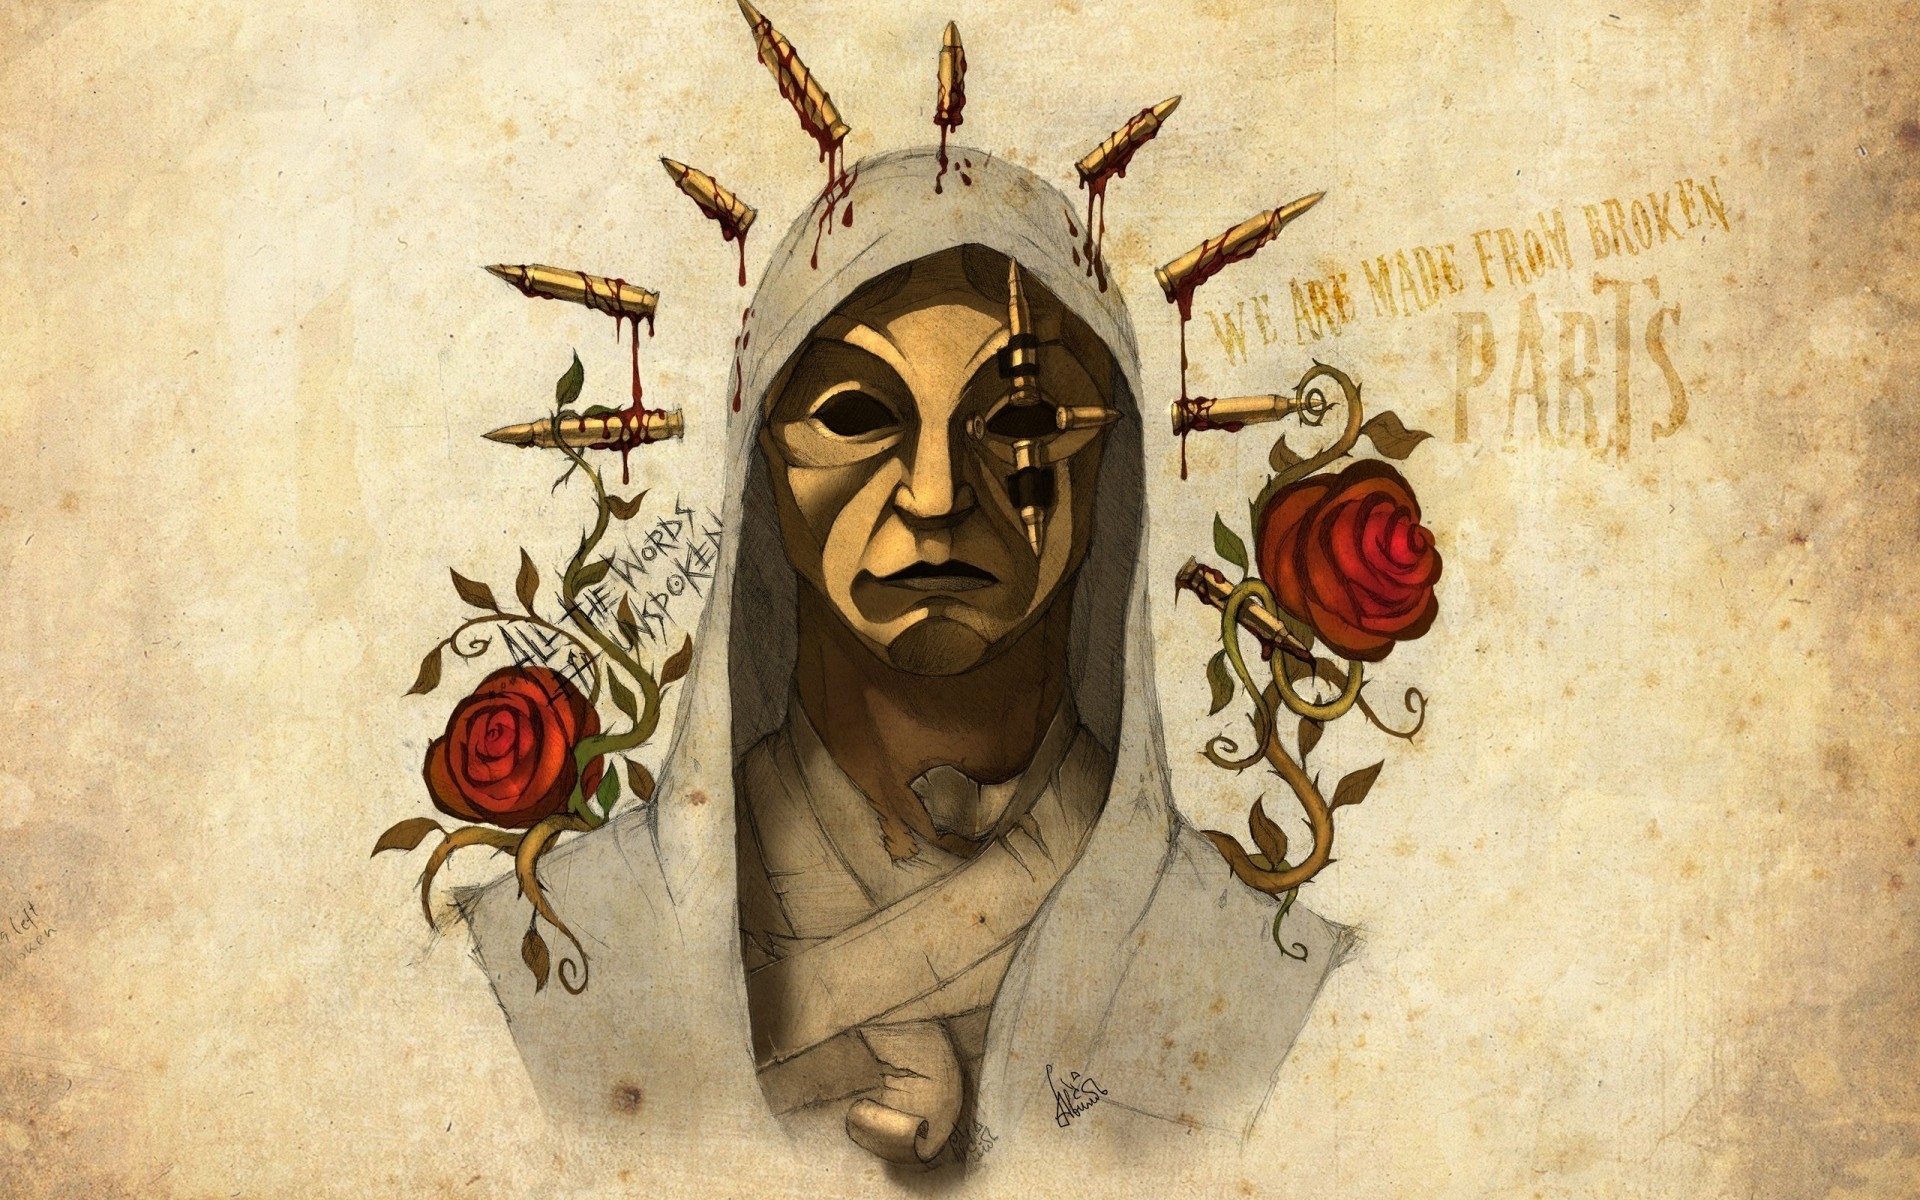 notes from the underground, danny, artwork, hollywood undead